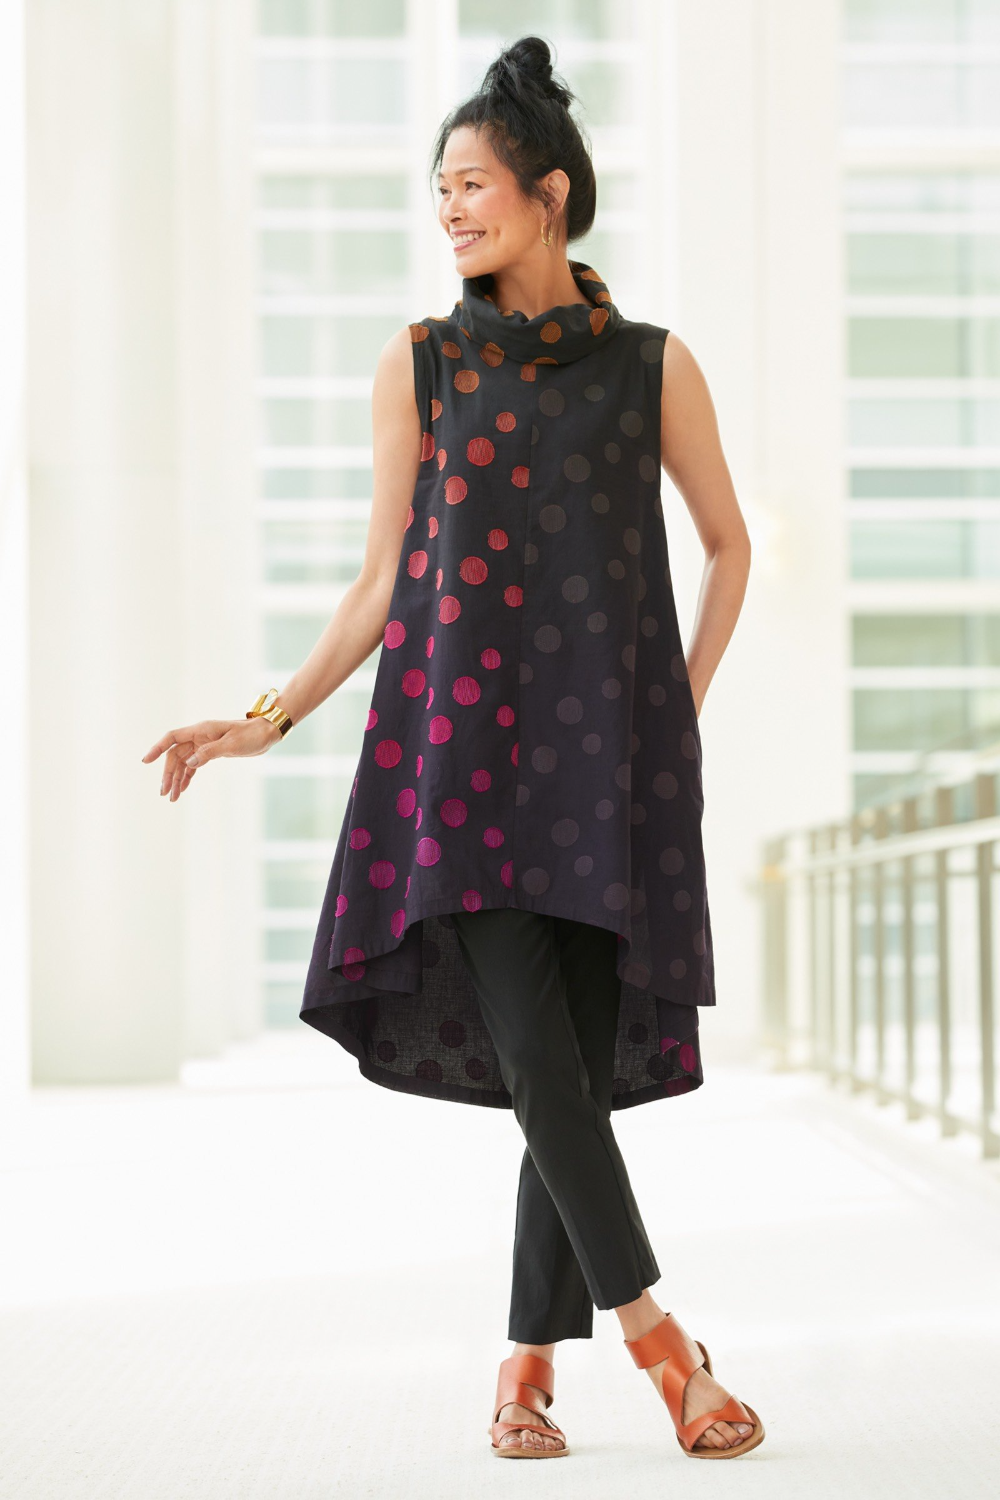 Sleeveless Tunic Outfits for
  Women